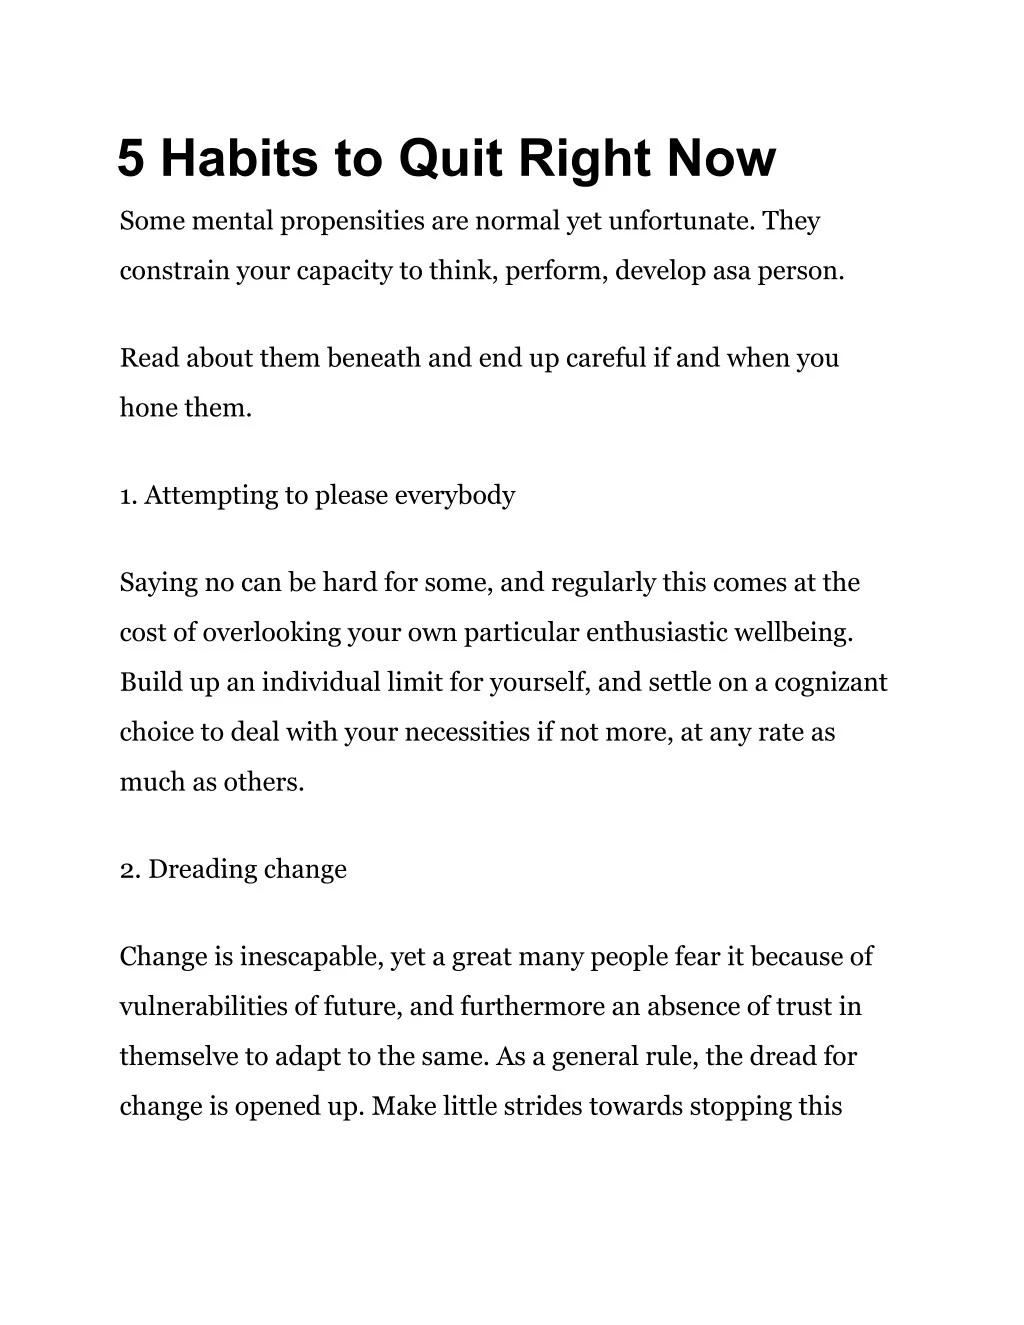 5 habits to quit right now